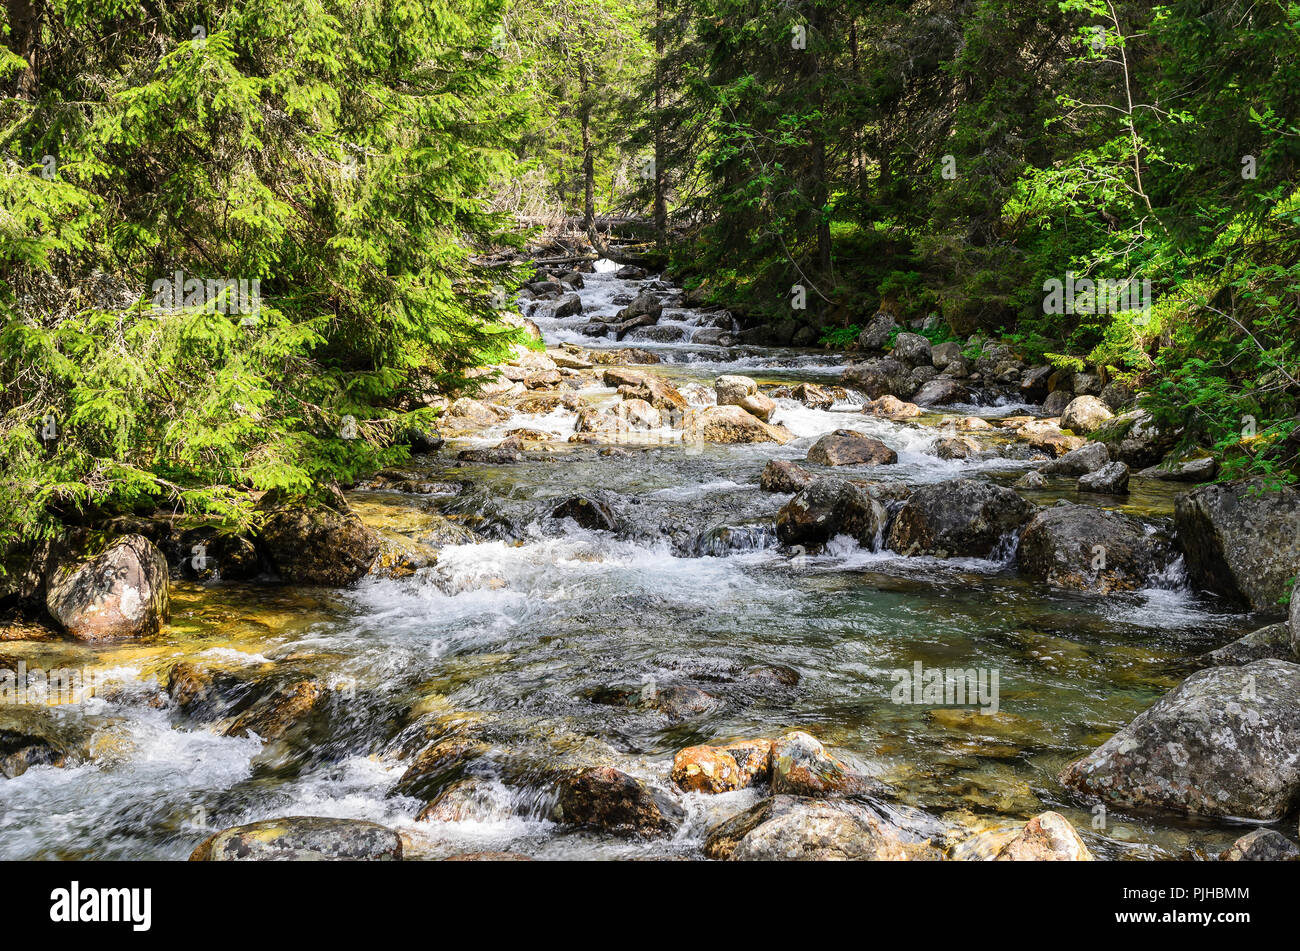 Mountain river. Beautiful scenery in the forest. Stock Photo